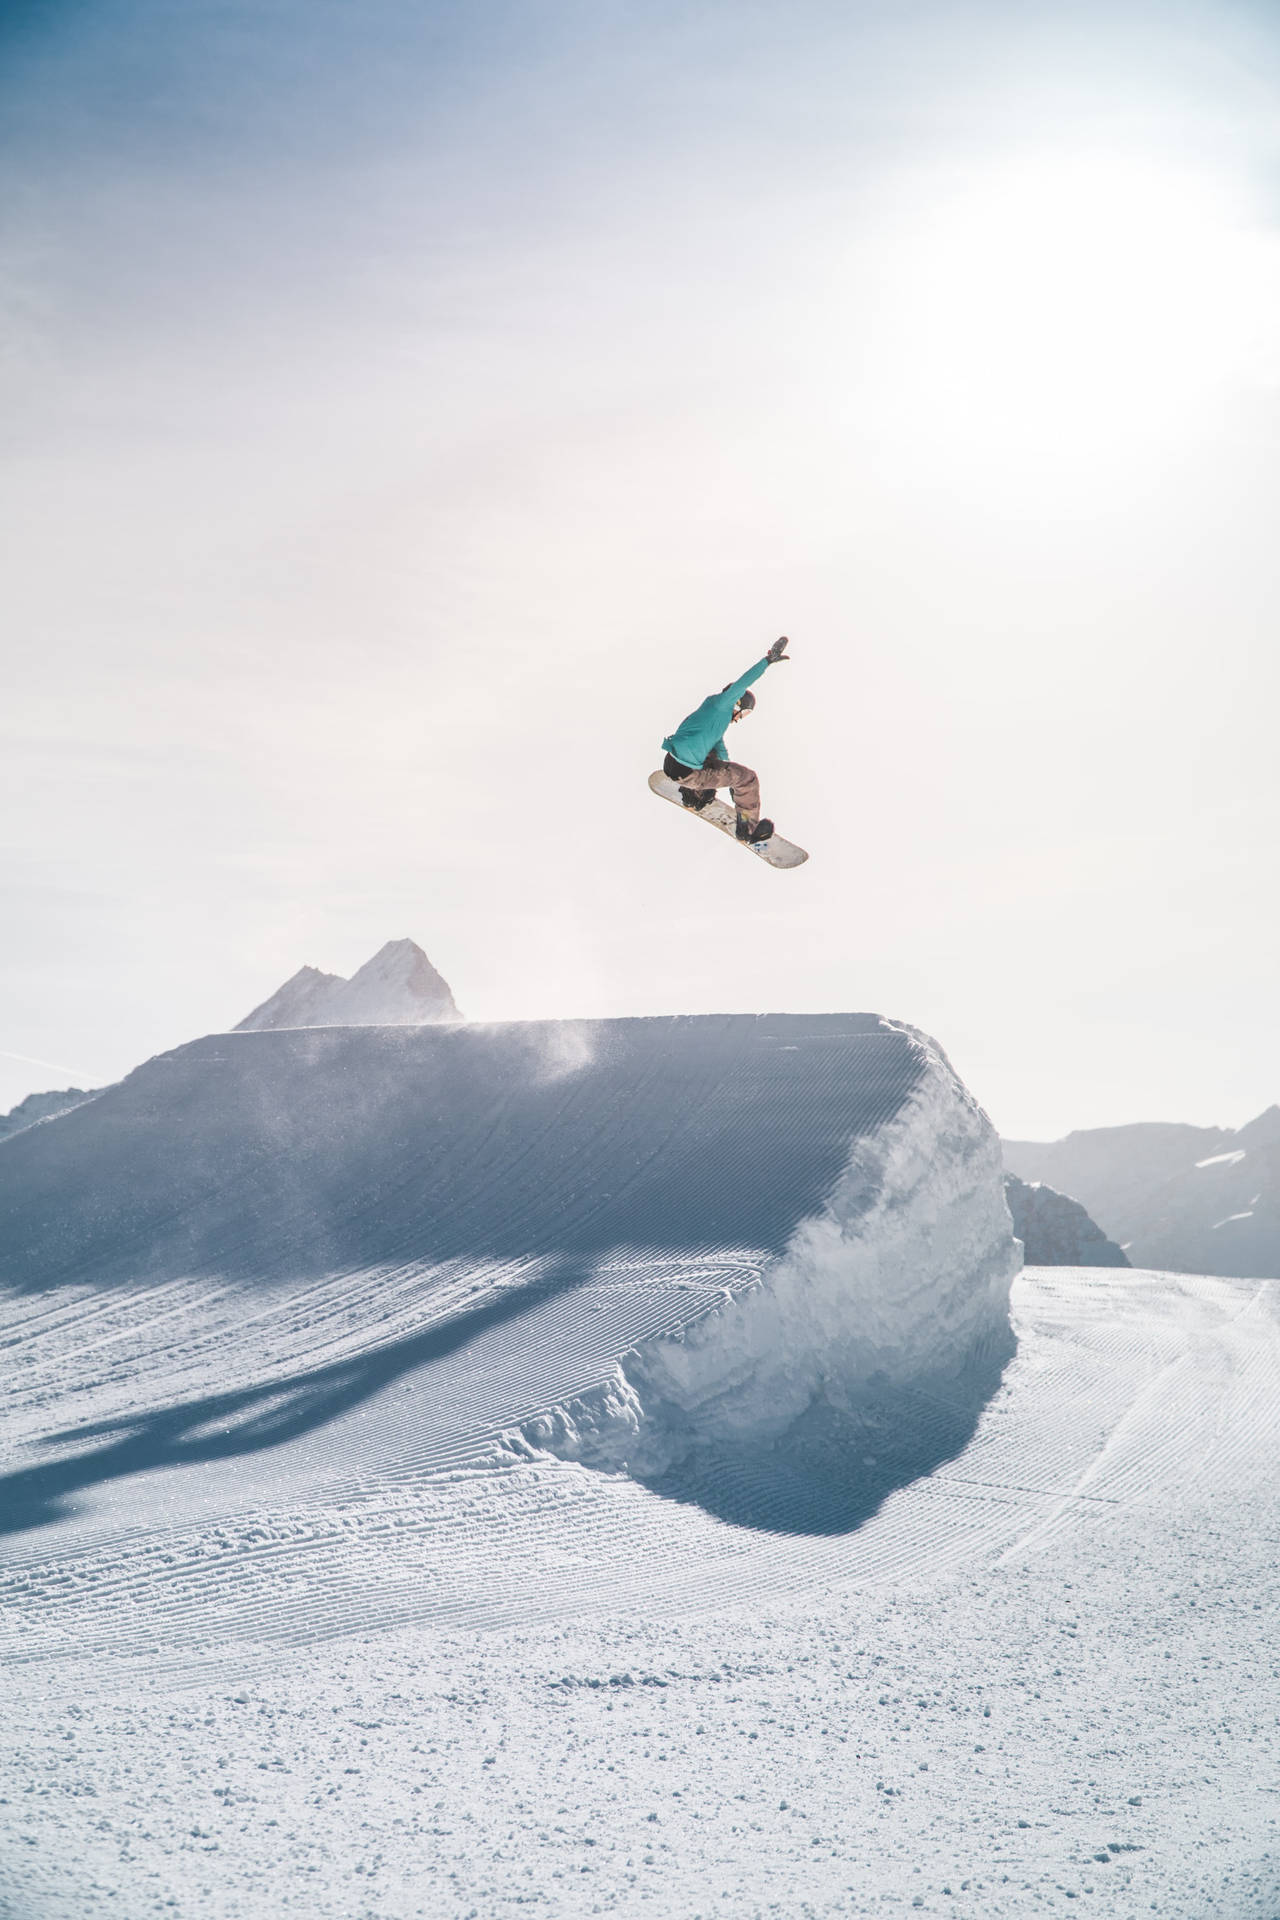 Sport Snowboarding In Snow-covered Mountain